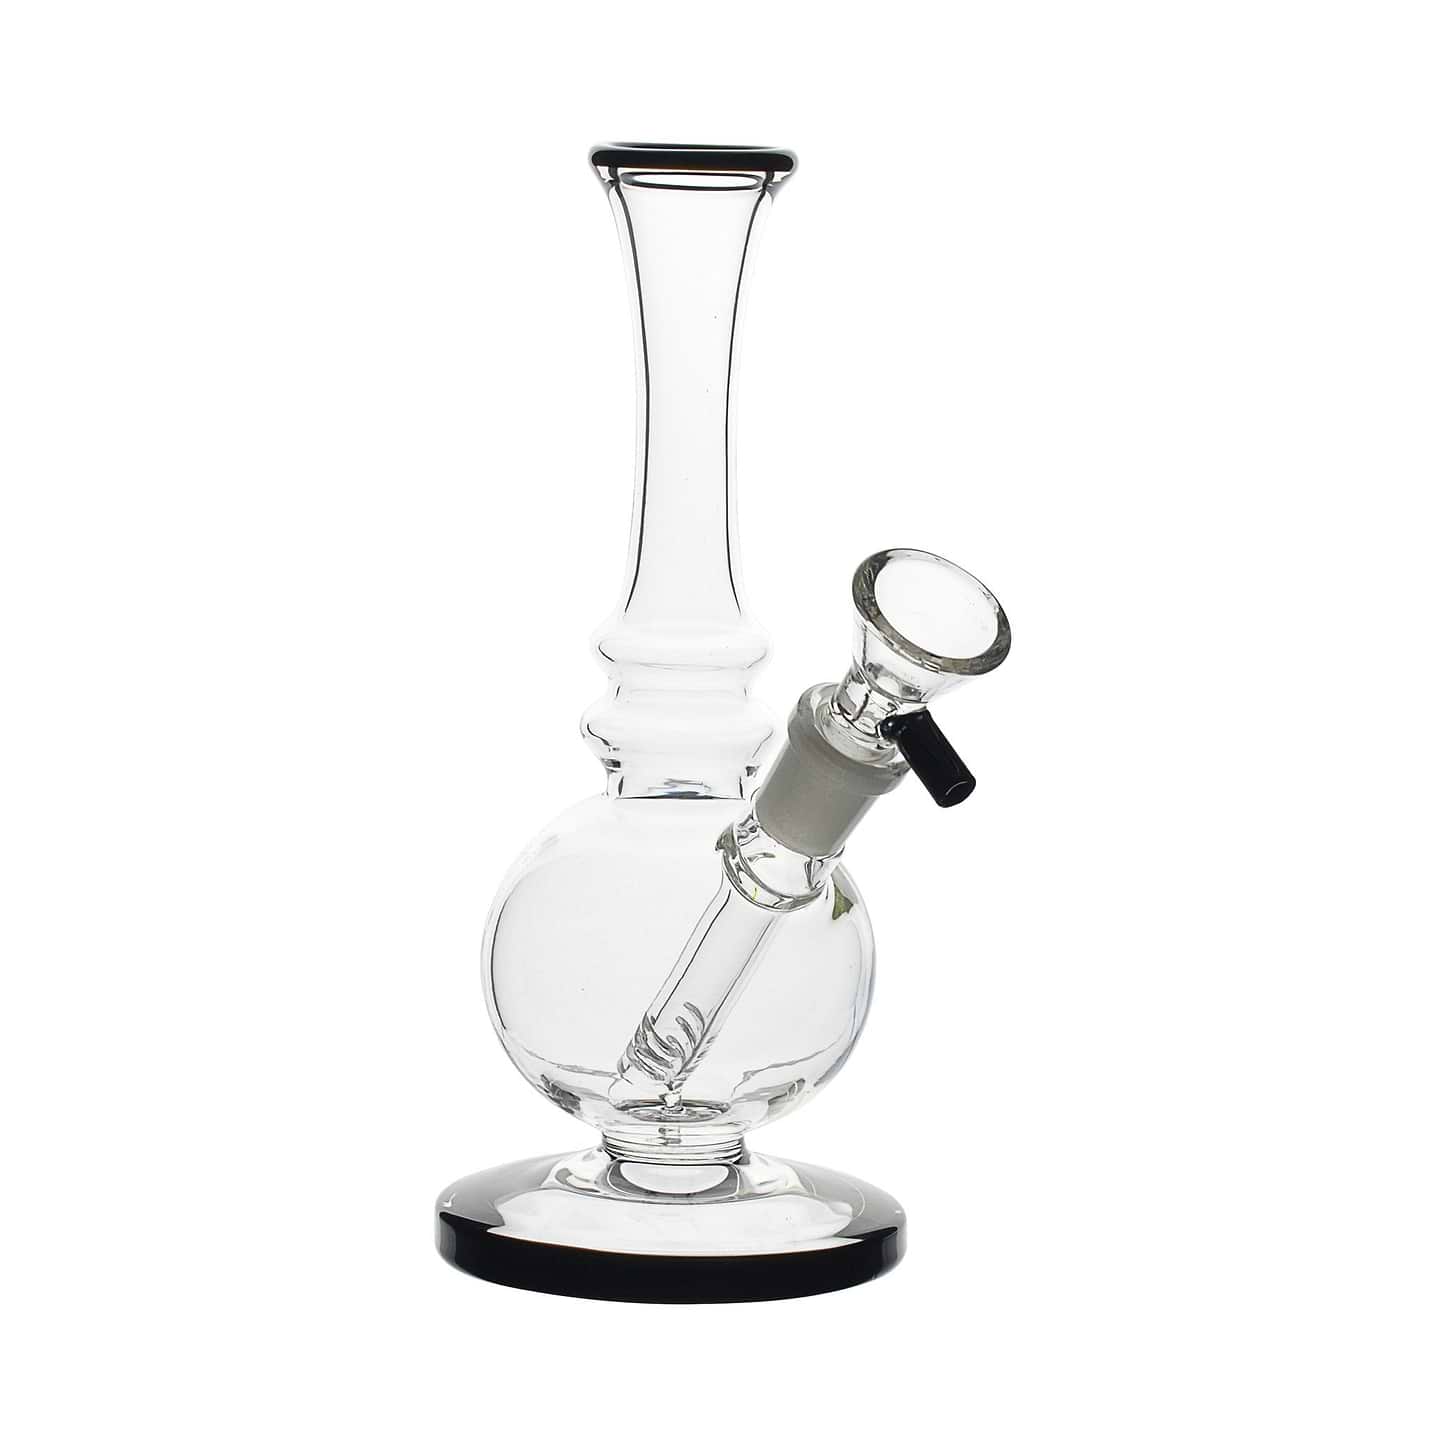 7.5-inch glass bong smoking device with elegant curves slide handle lab or genie-in-a-bottle look black tip and bottom